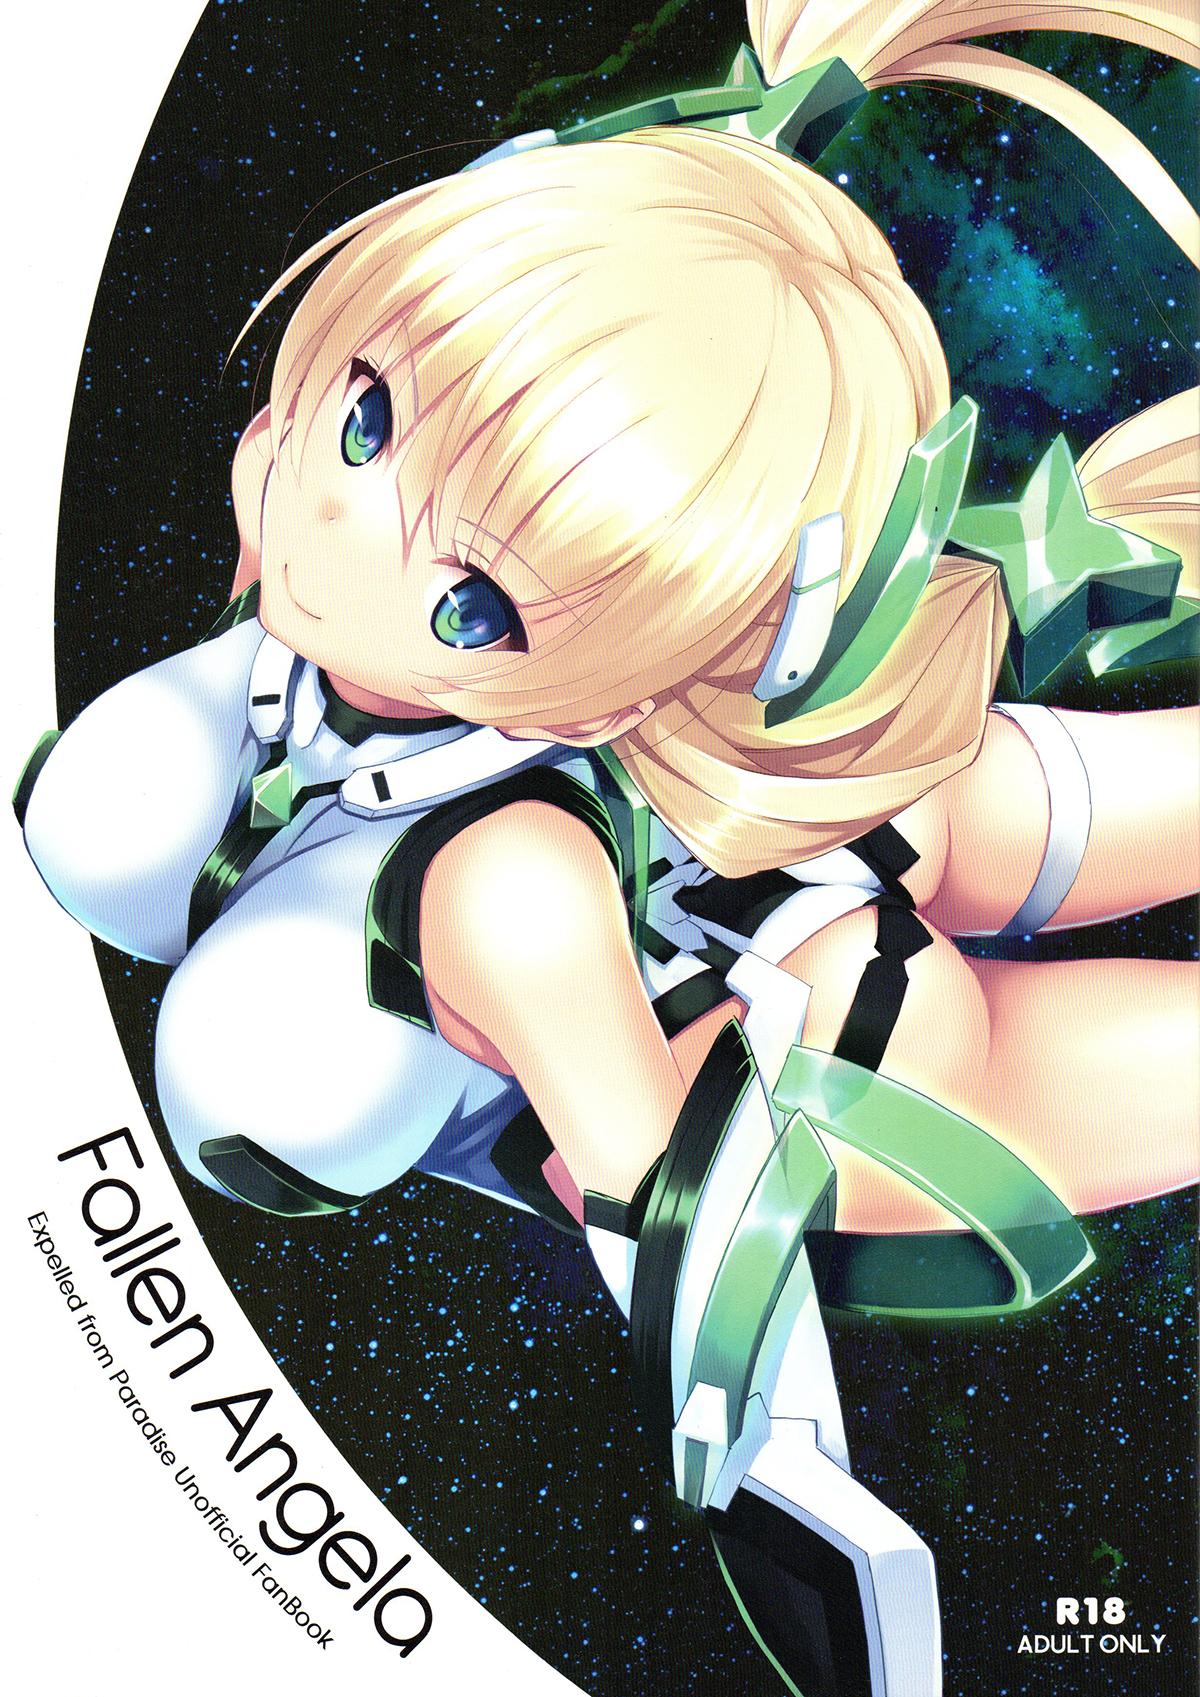 Hair Fallen Angela - Expelled from paradise Eurosex - Picture 1